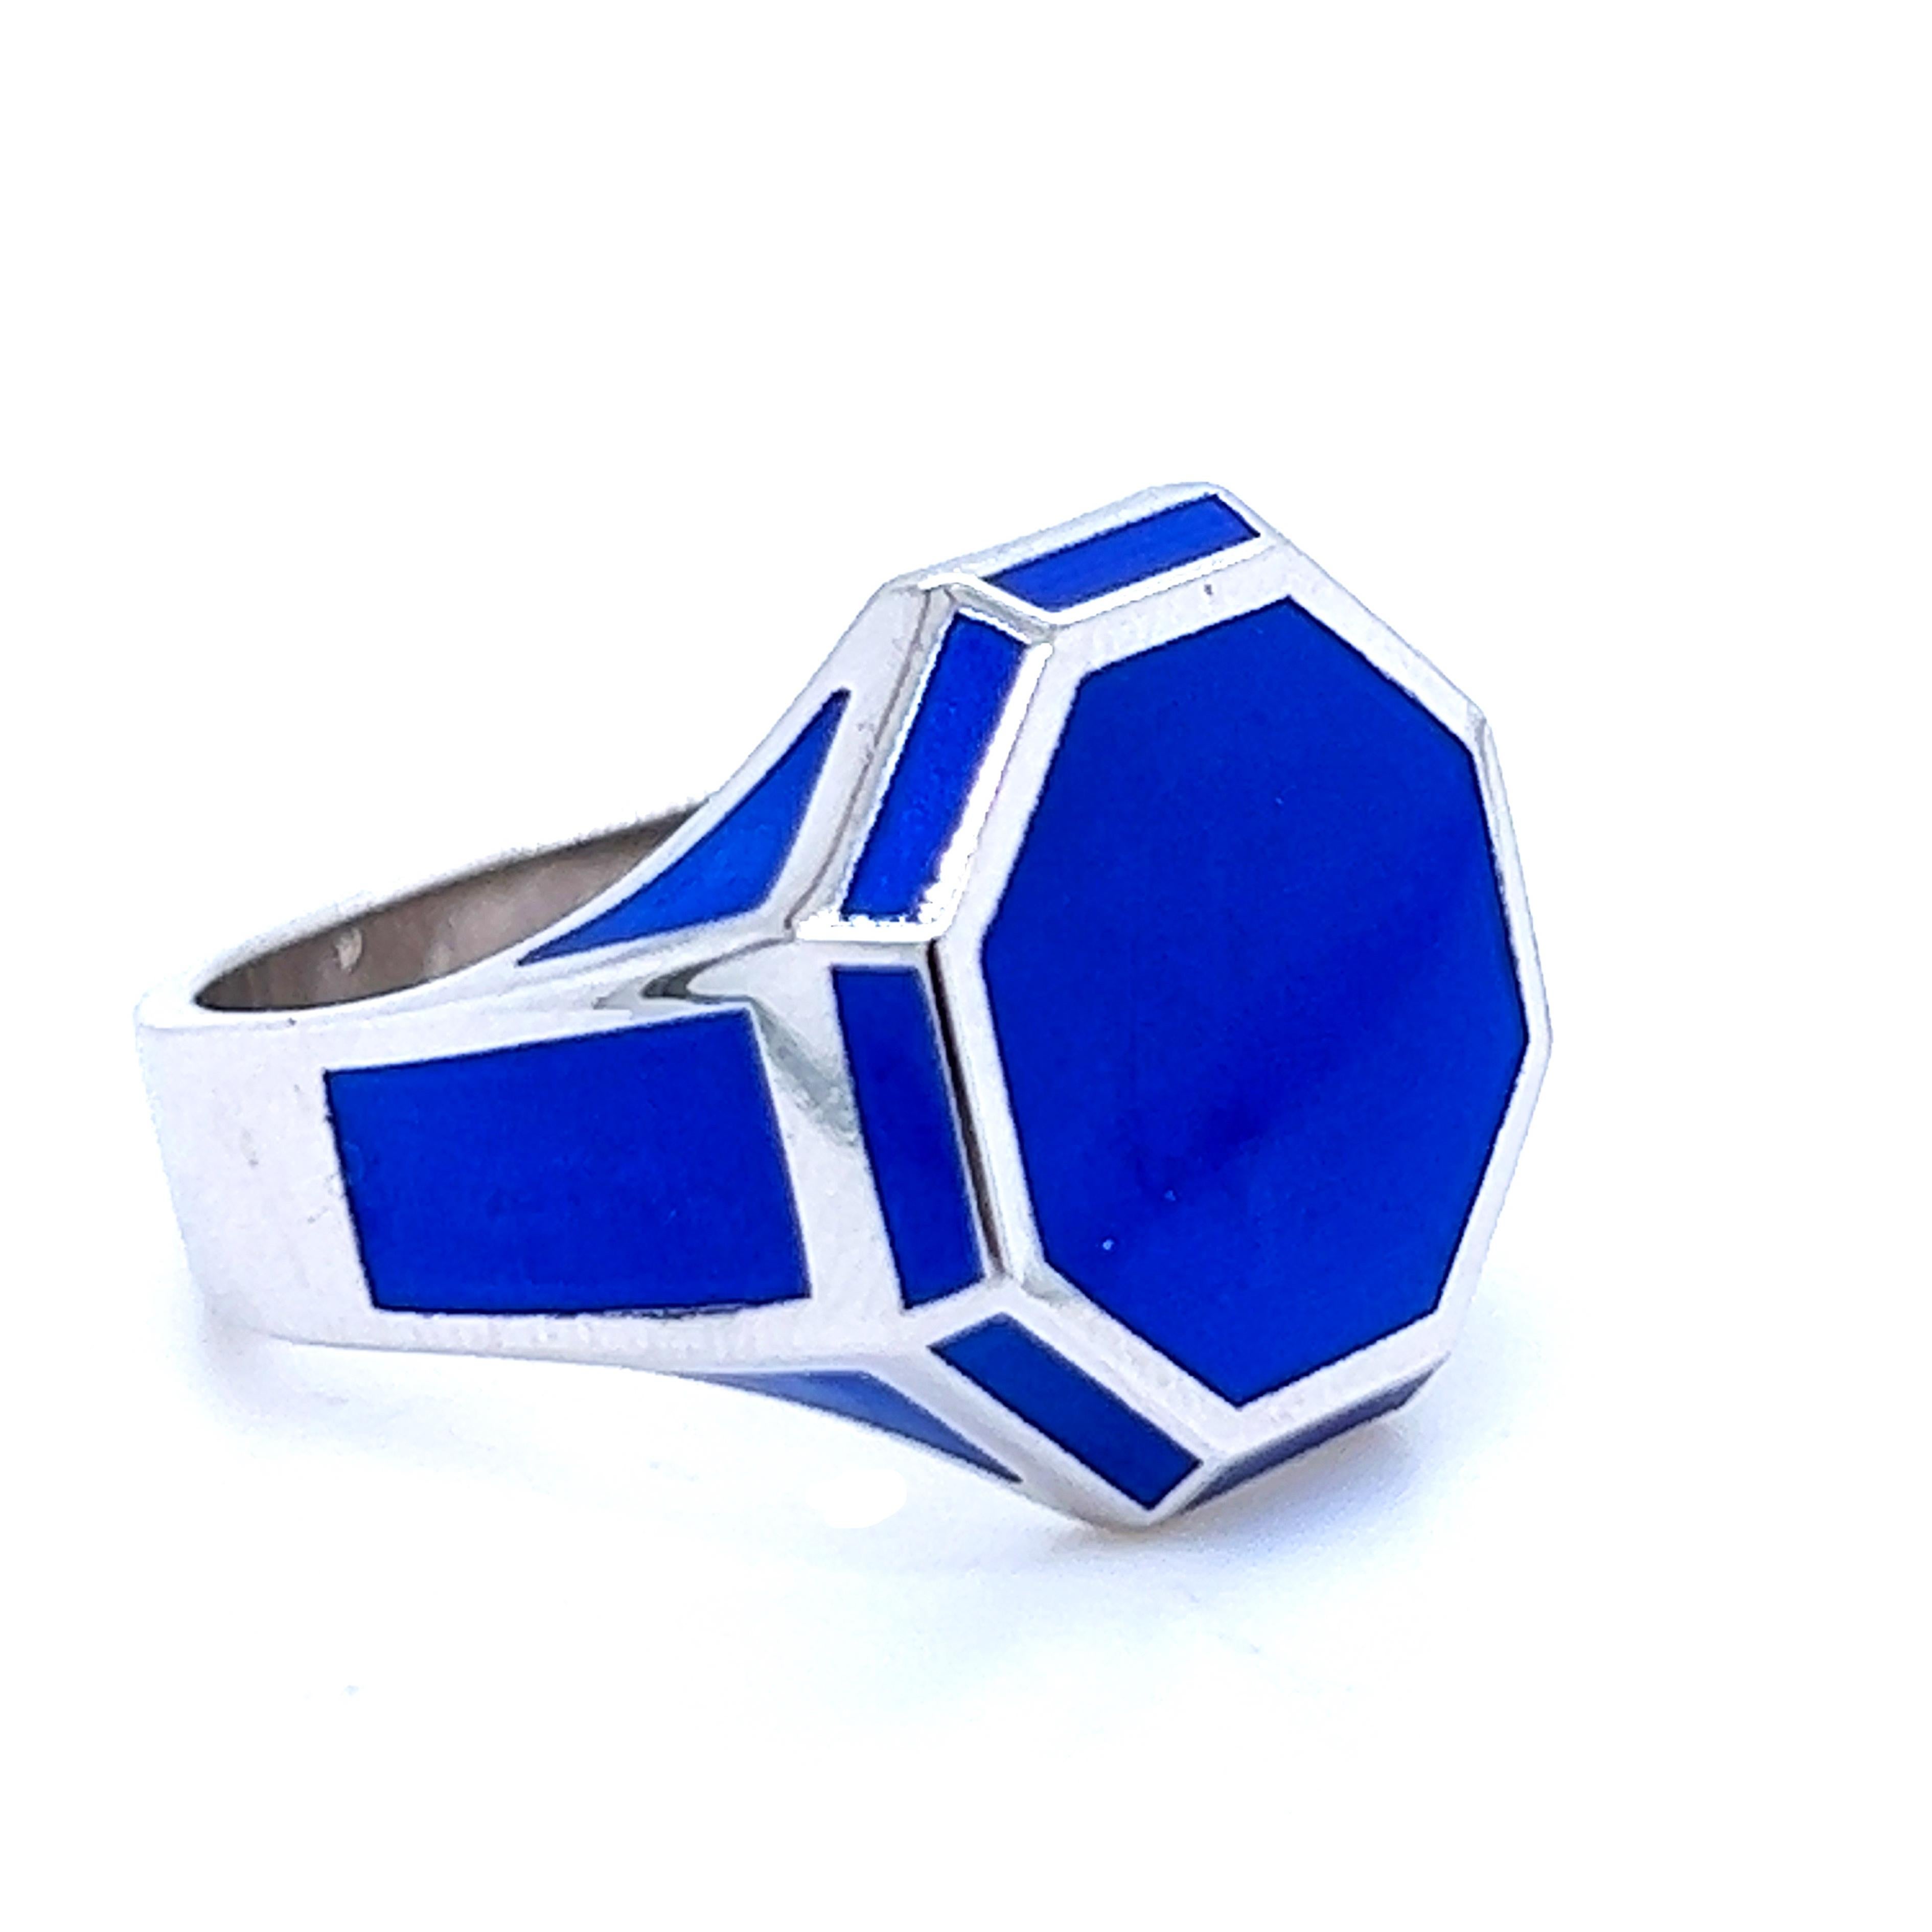 Contemporary, Chic yet Unique hexagonal royal blue hand enameled cocktail ring in a solid sterling silver setting. Perfect to wear as signet ring on the pinkie.
In our smart suede brown box and pouch.
Us Size 7 1/2,  French Size 56

